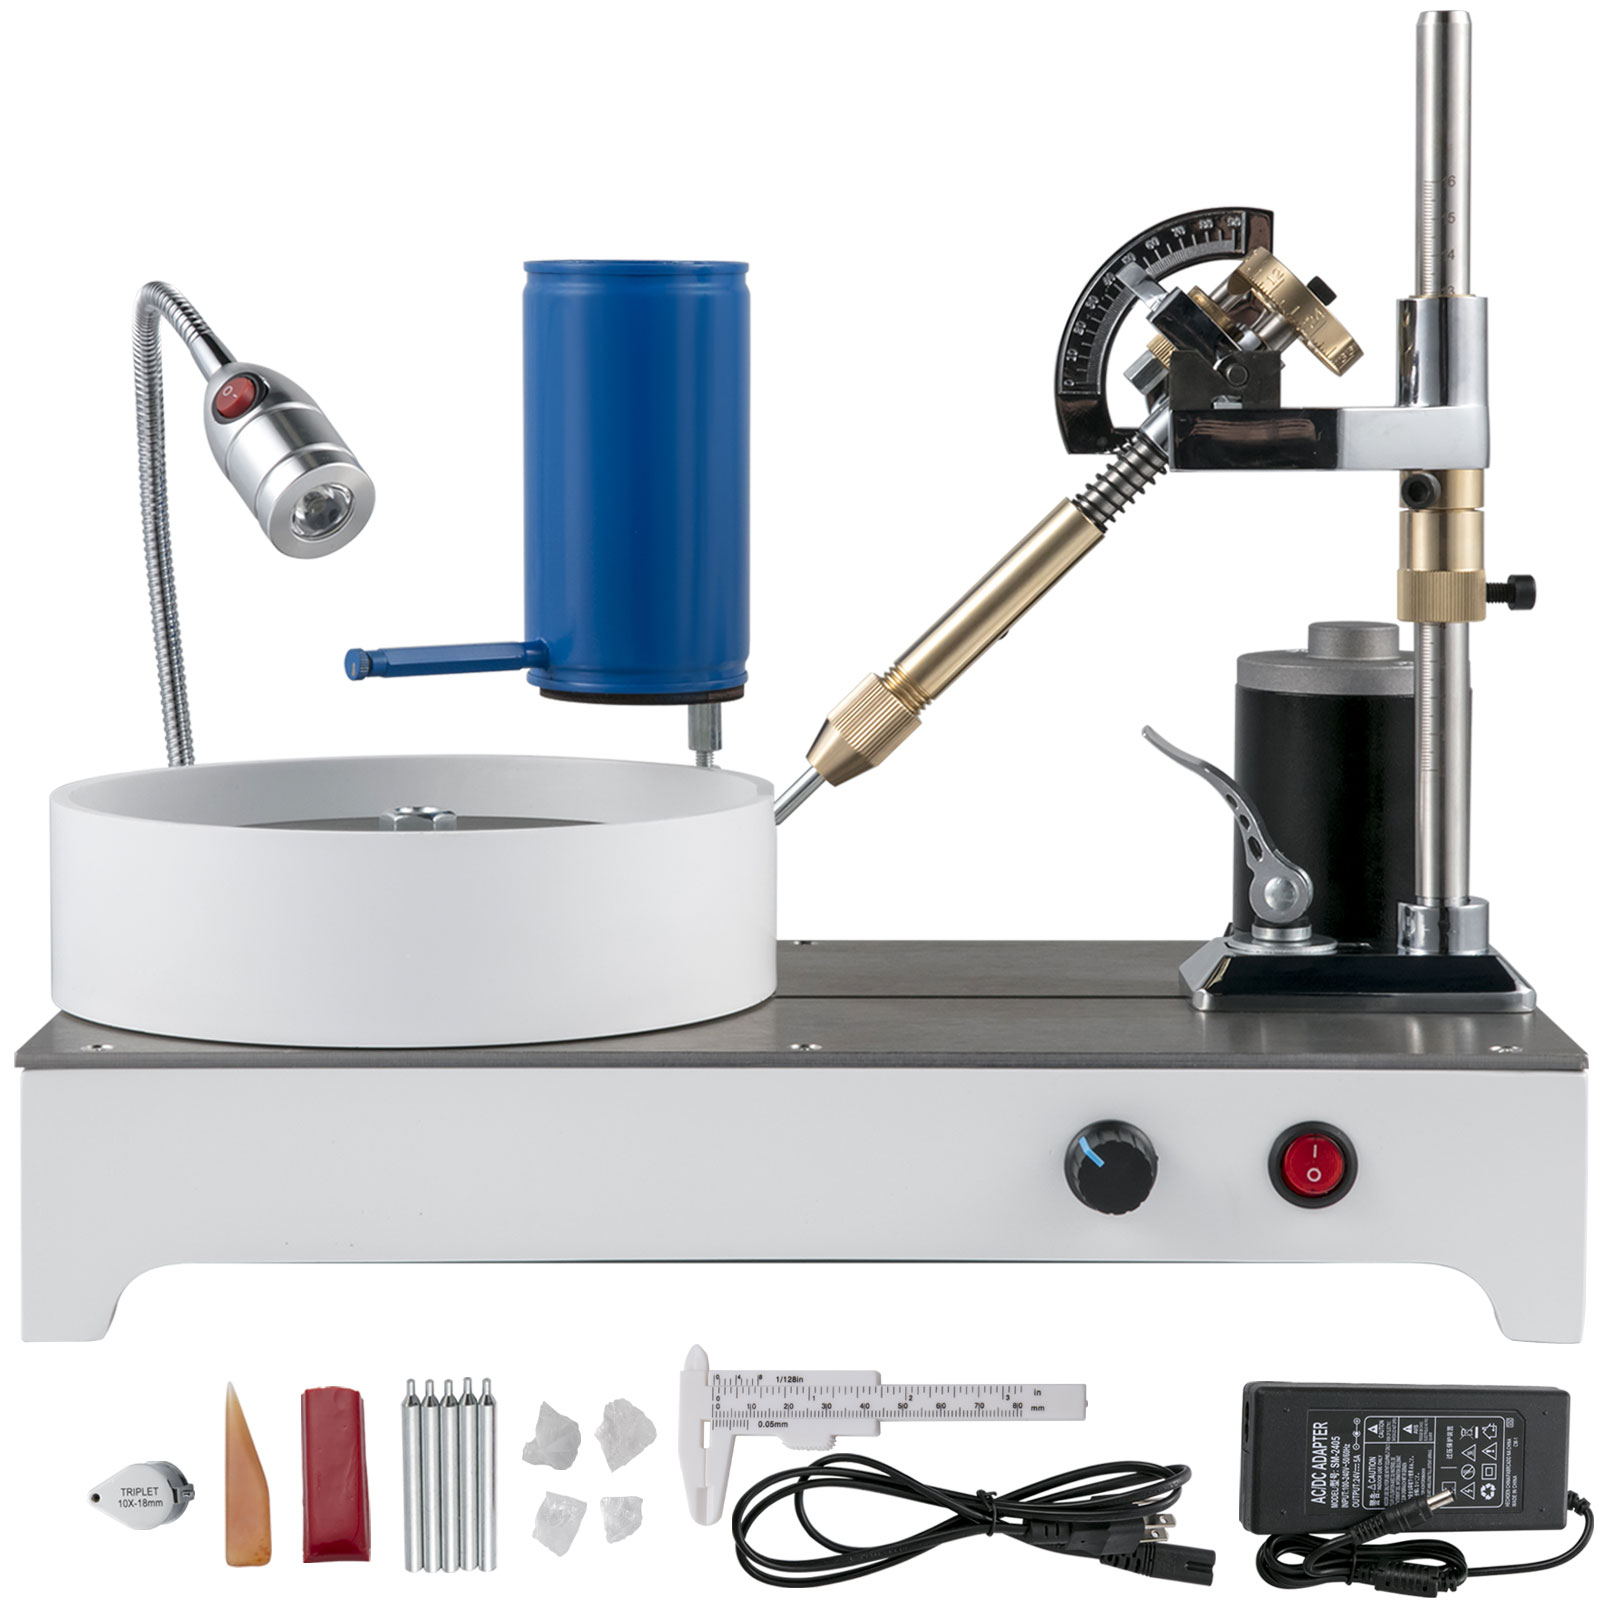 Gem Faceting Machine Max.3000RPM Jewelry Rock Polisher Jade Flat Grinder  with Infinitely Variable Speed 